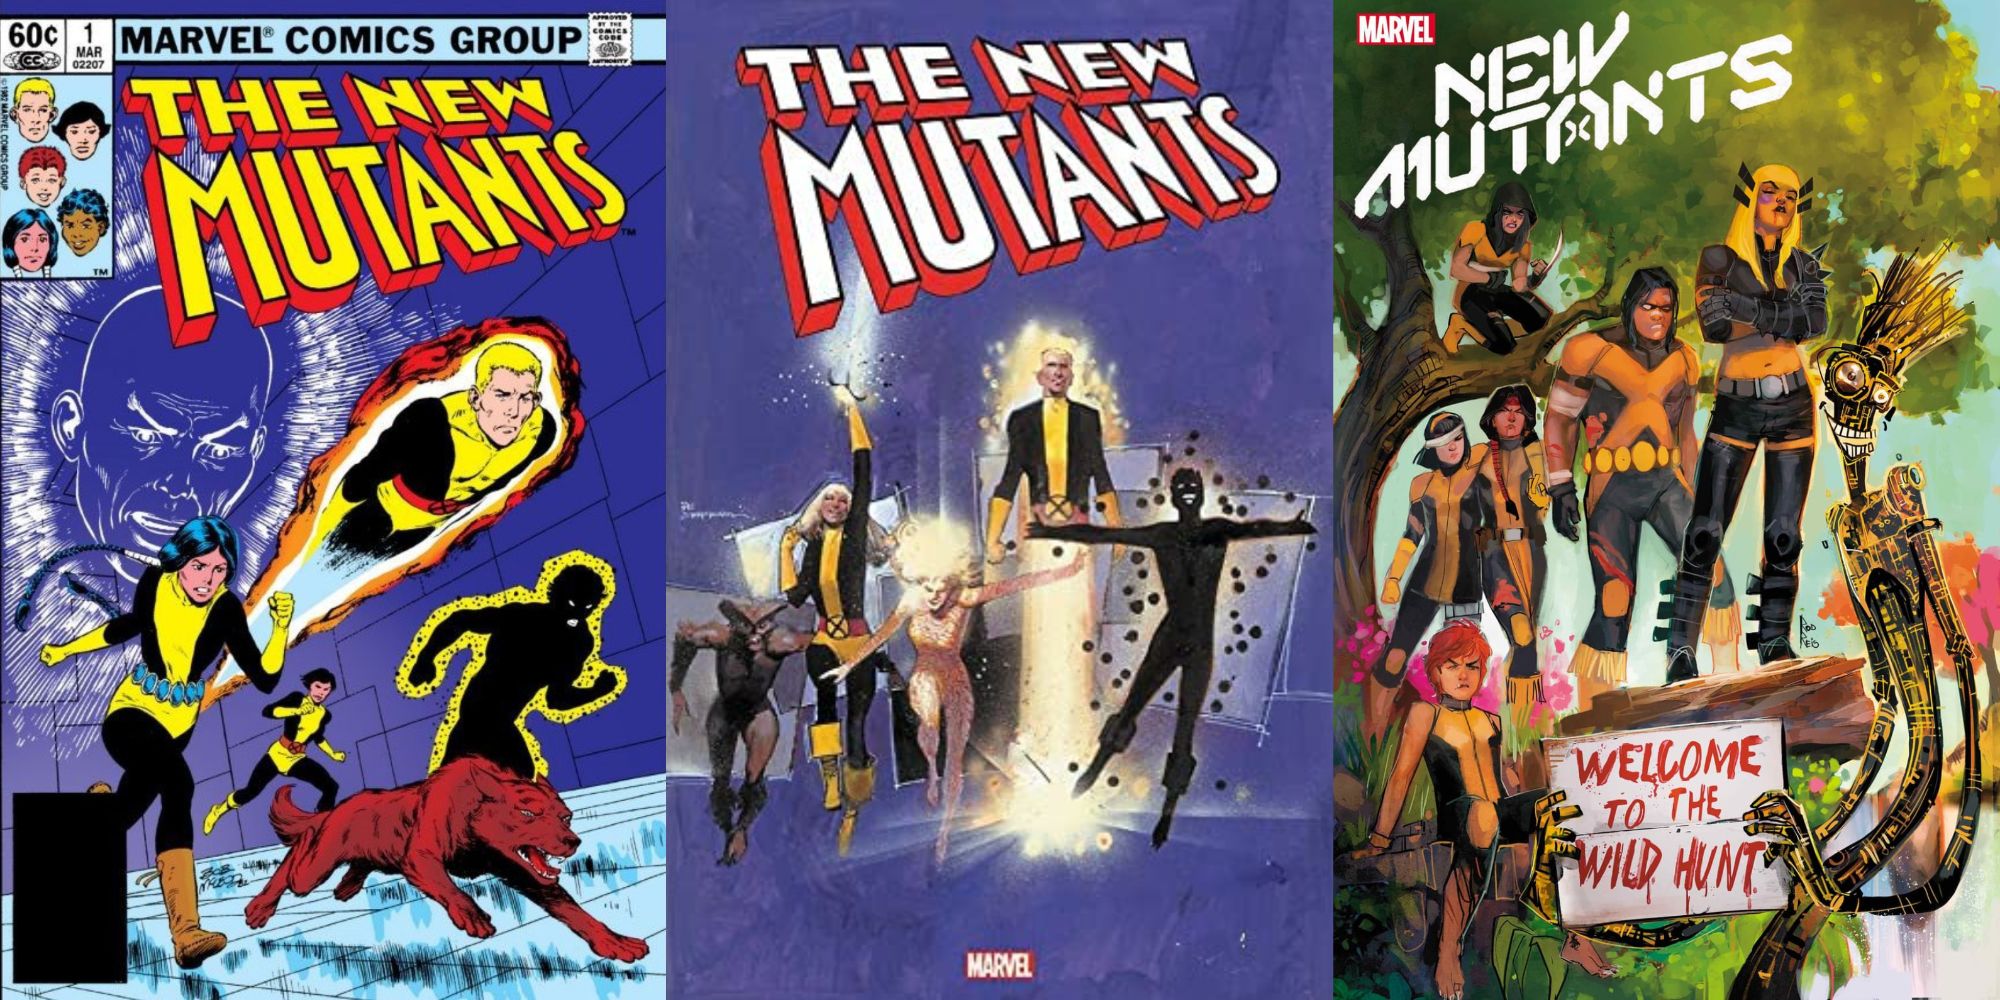 From left to right: the cover to issue #1 of the New Mutants by Bob McLeod, the New Mutants by Bill Sienkiewicz, and the Krakoan New Mutants by Rob Reis